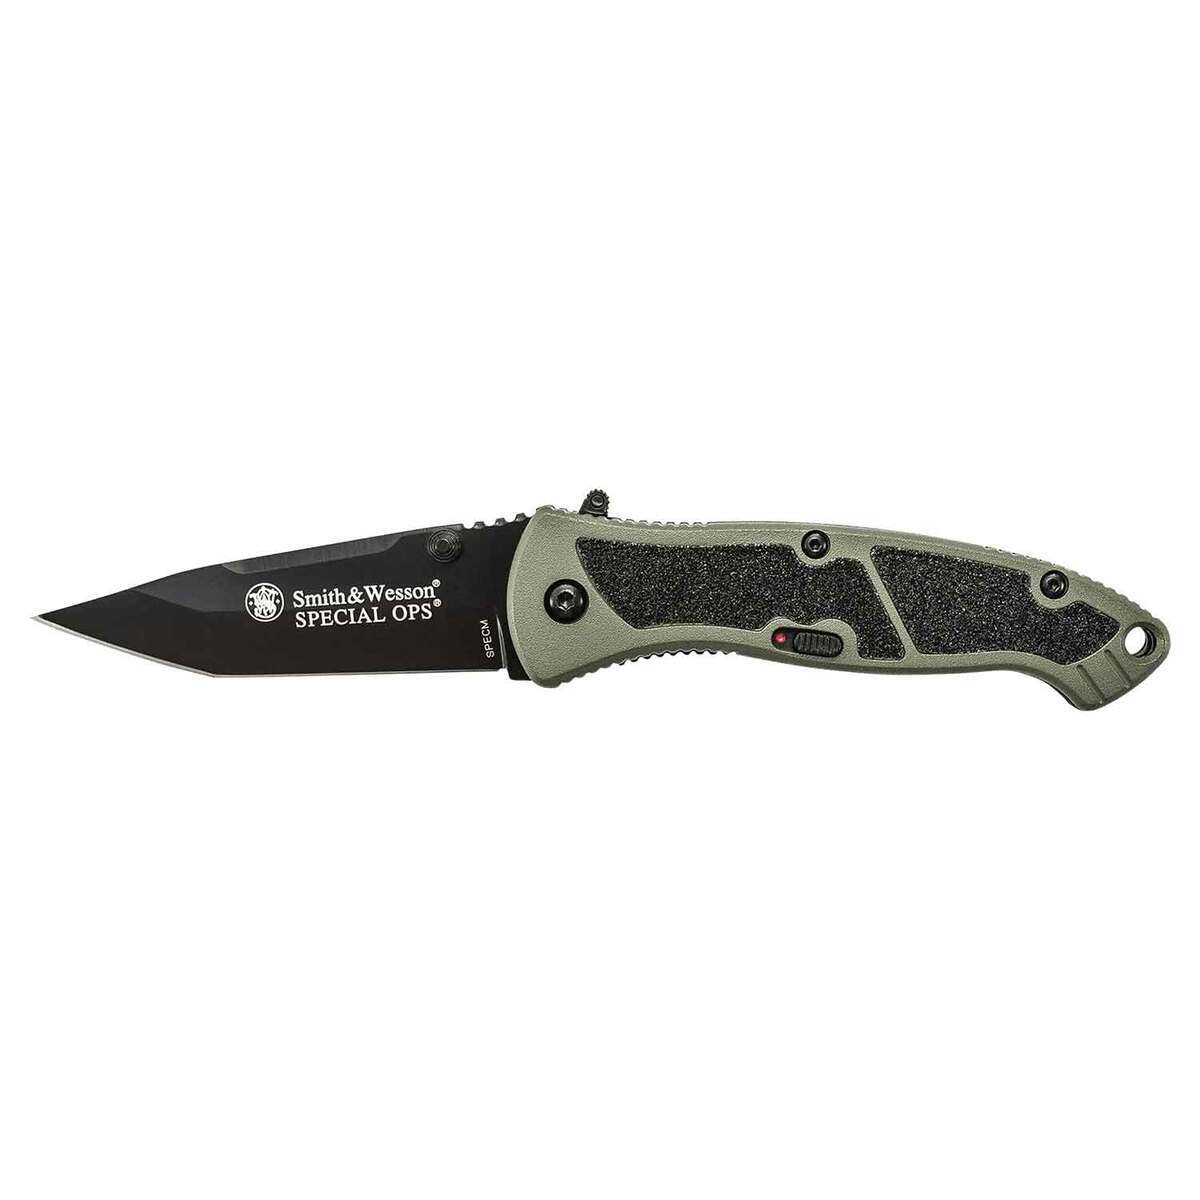 Smith & Wesson's Sideburn pocket knife packs a 3-inch blade with